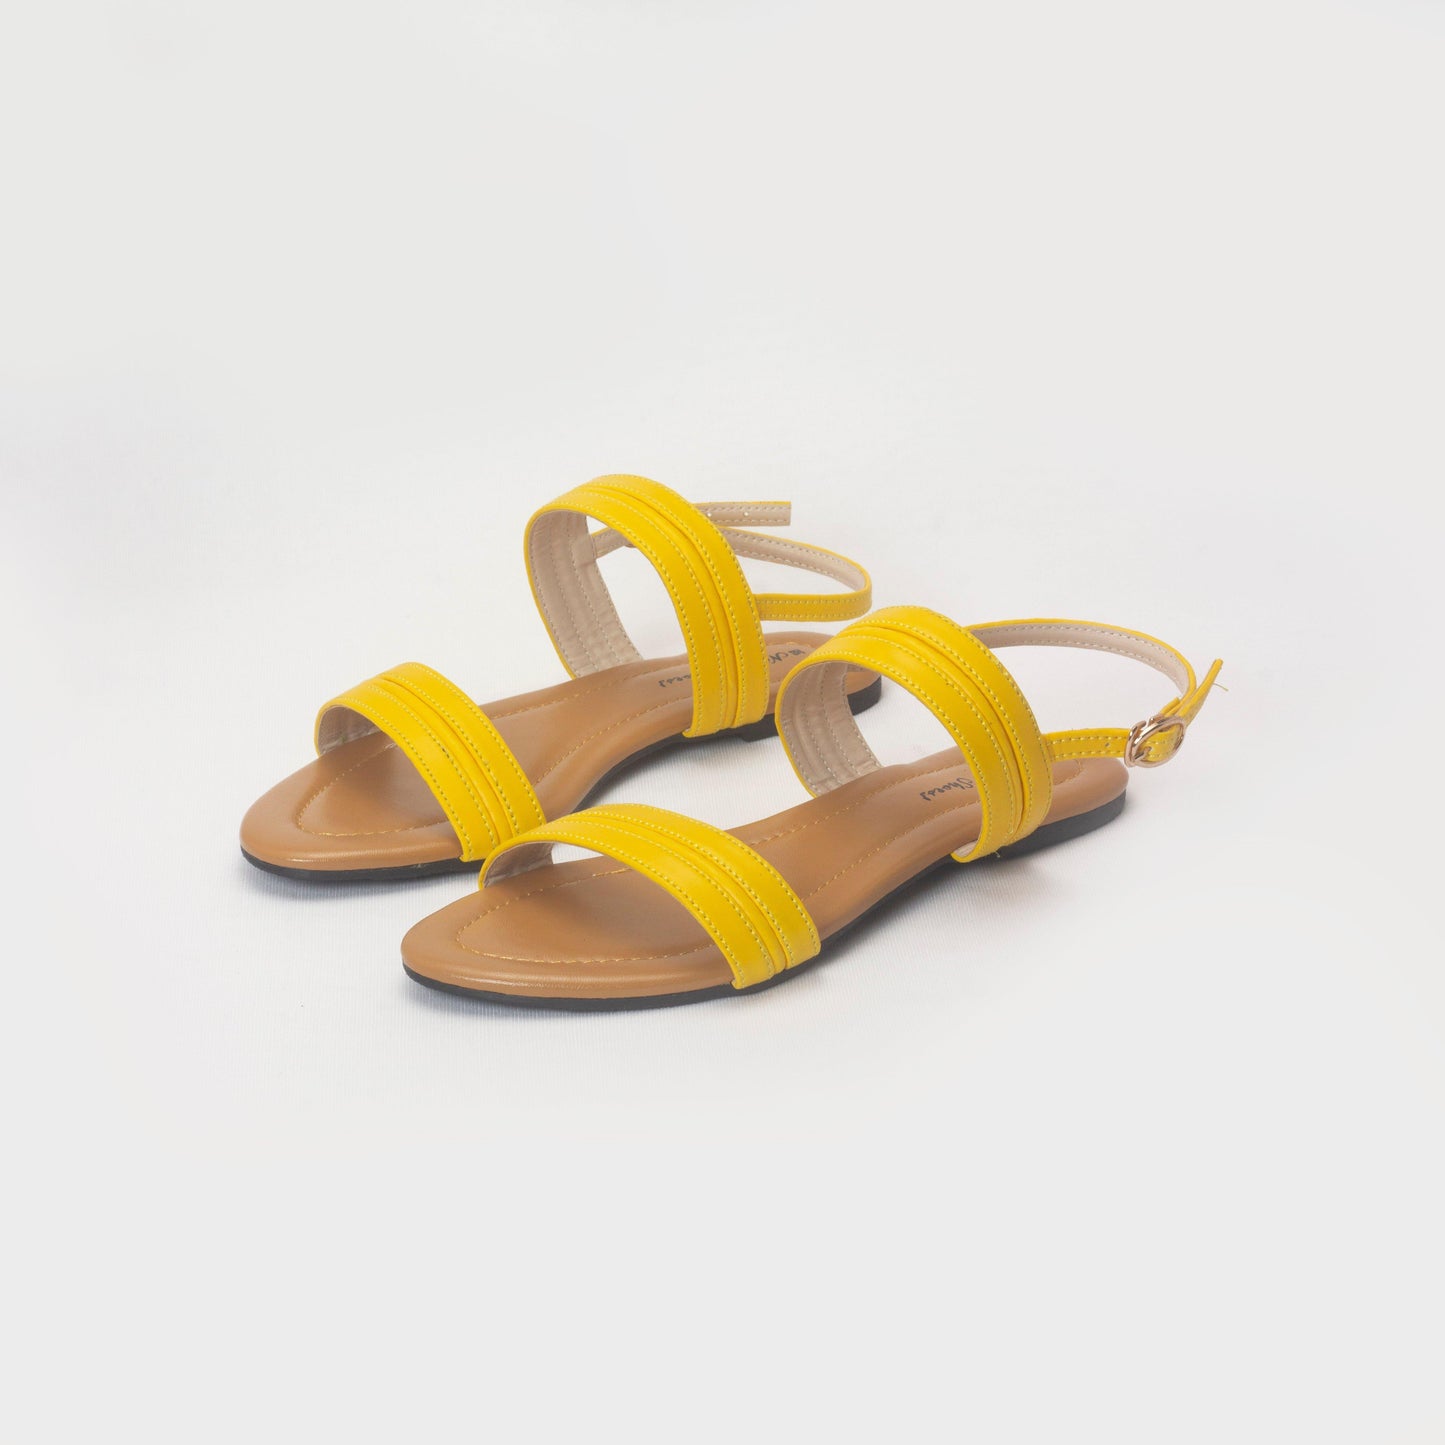 Nawabi Shoes BD Shoes 35 / yellow Comfortable and Stylish Flat Sandals for Women